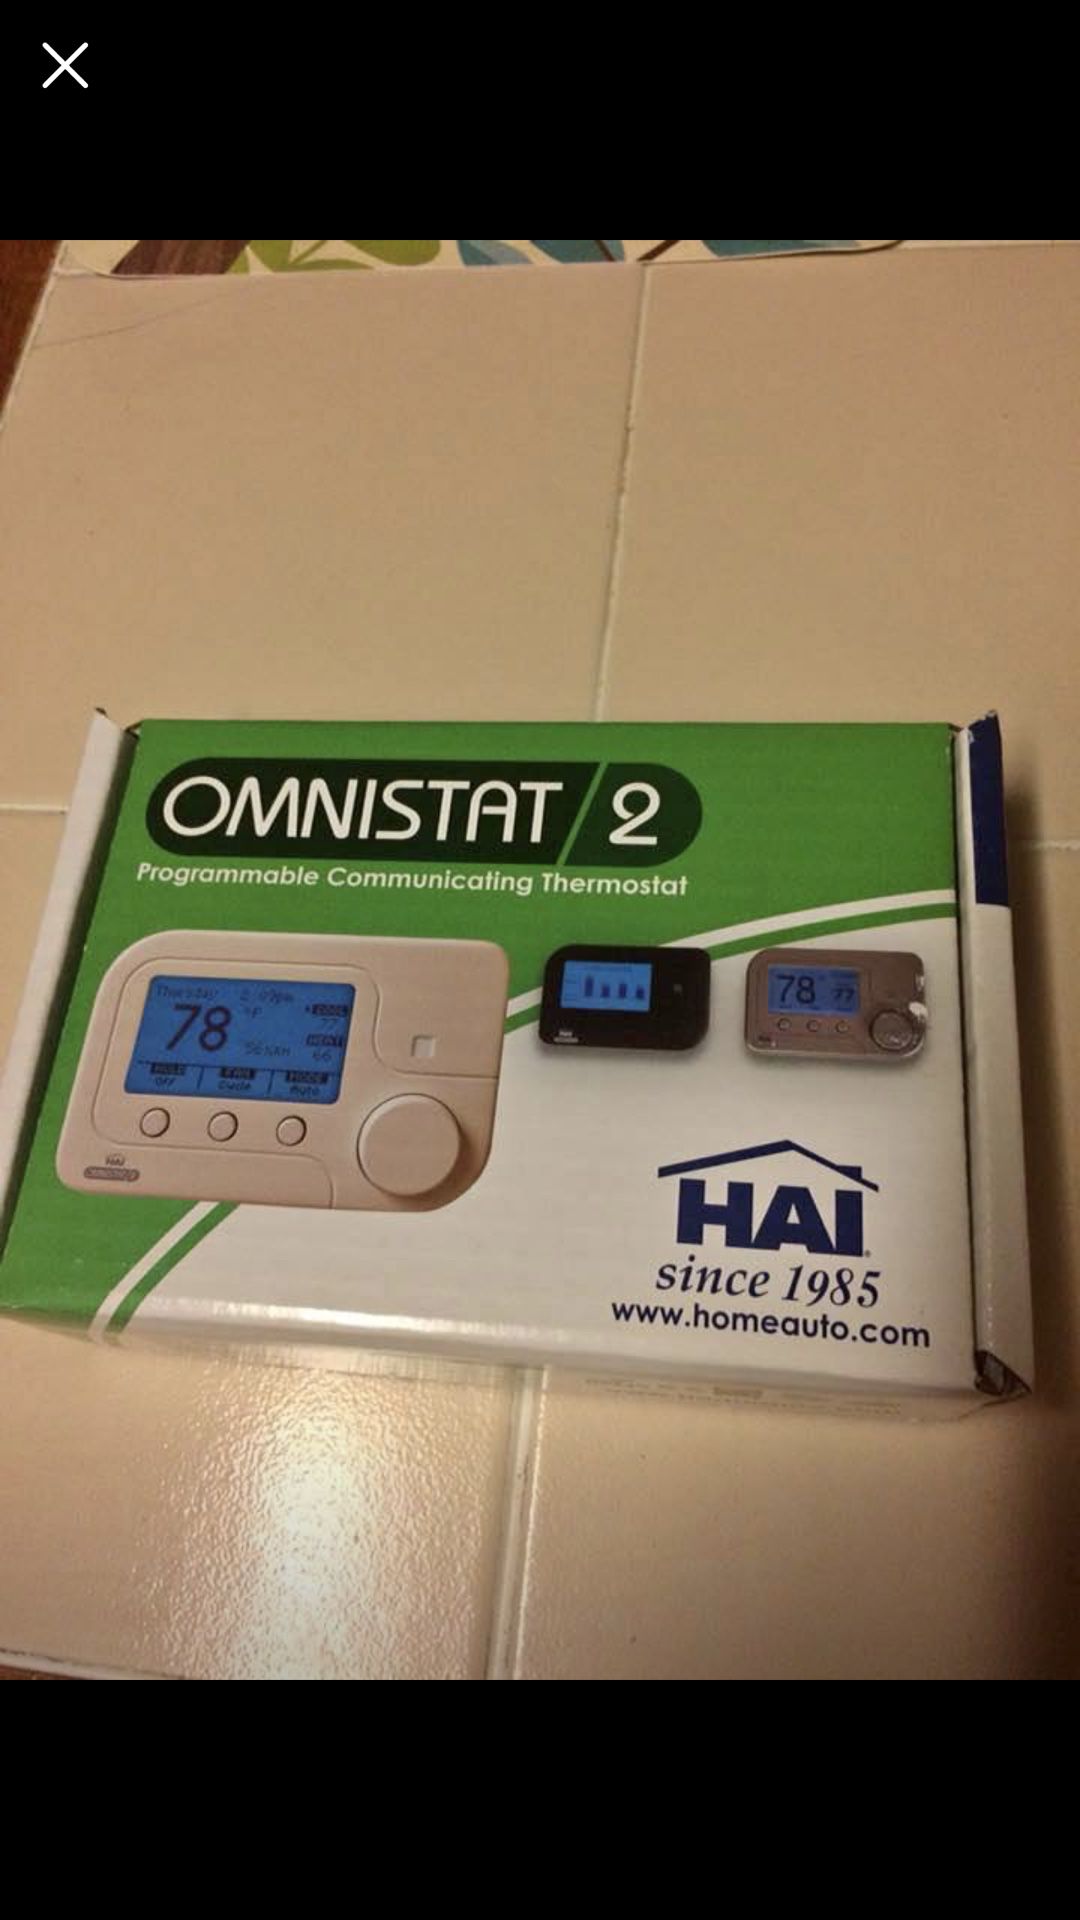 Omnistat 2 Programmable Thermostat